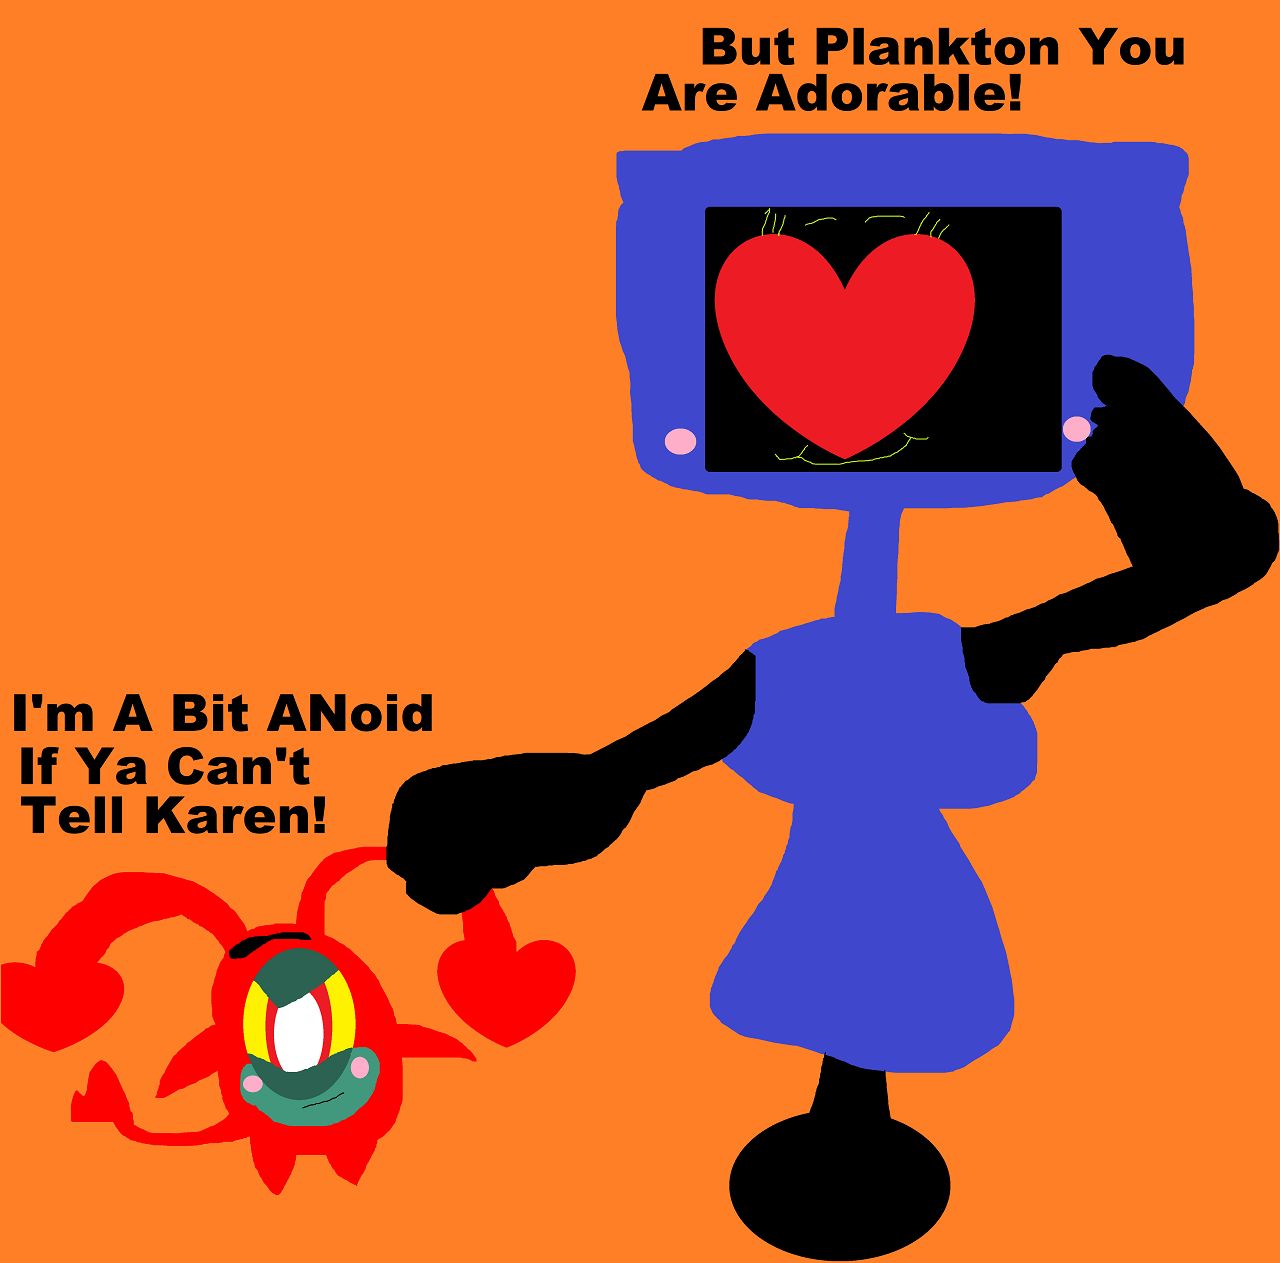 Plankton is A Bit ANoid By His V Day Outfit Karen Made Him by Falconlobo